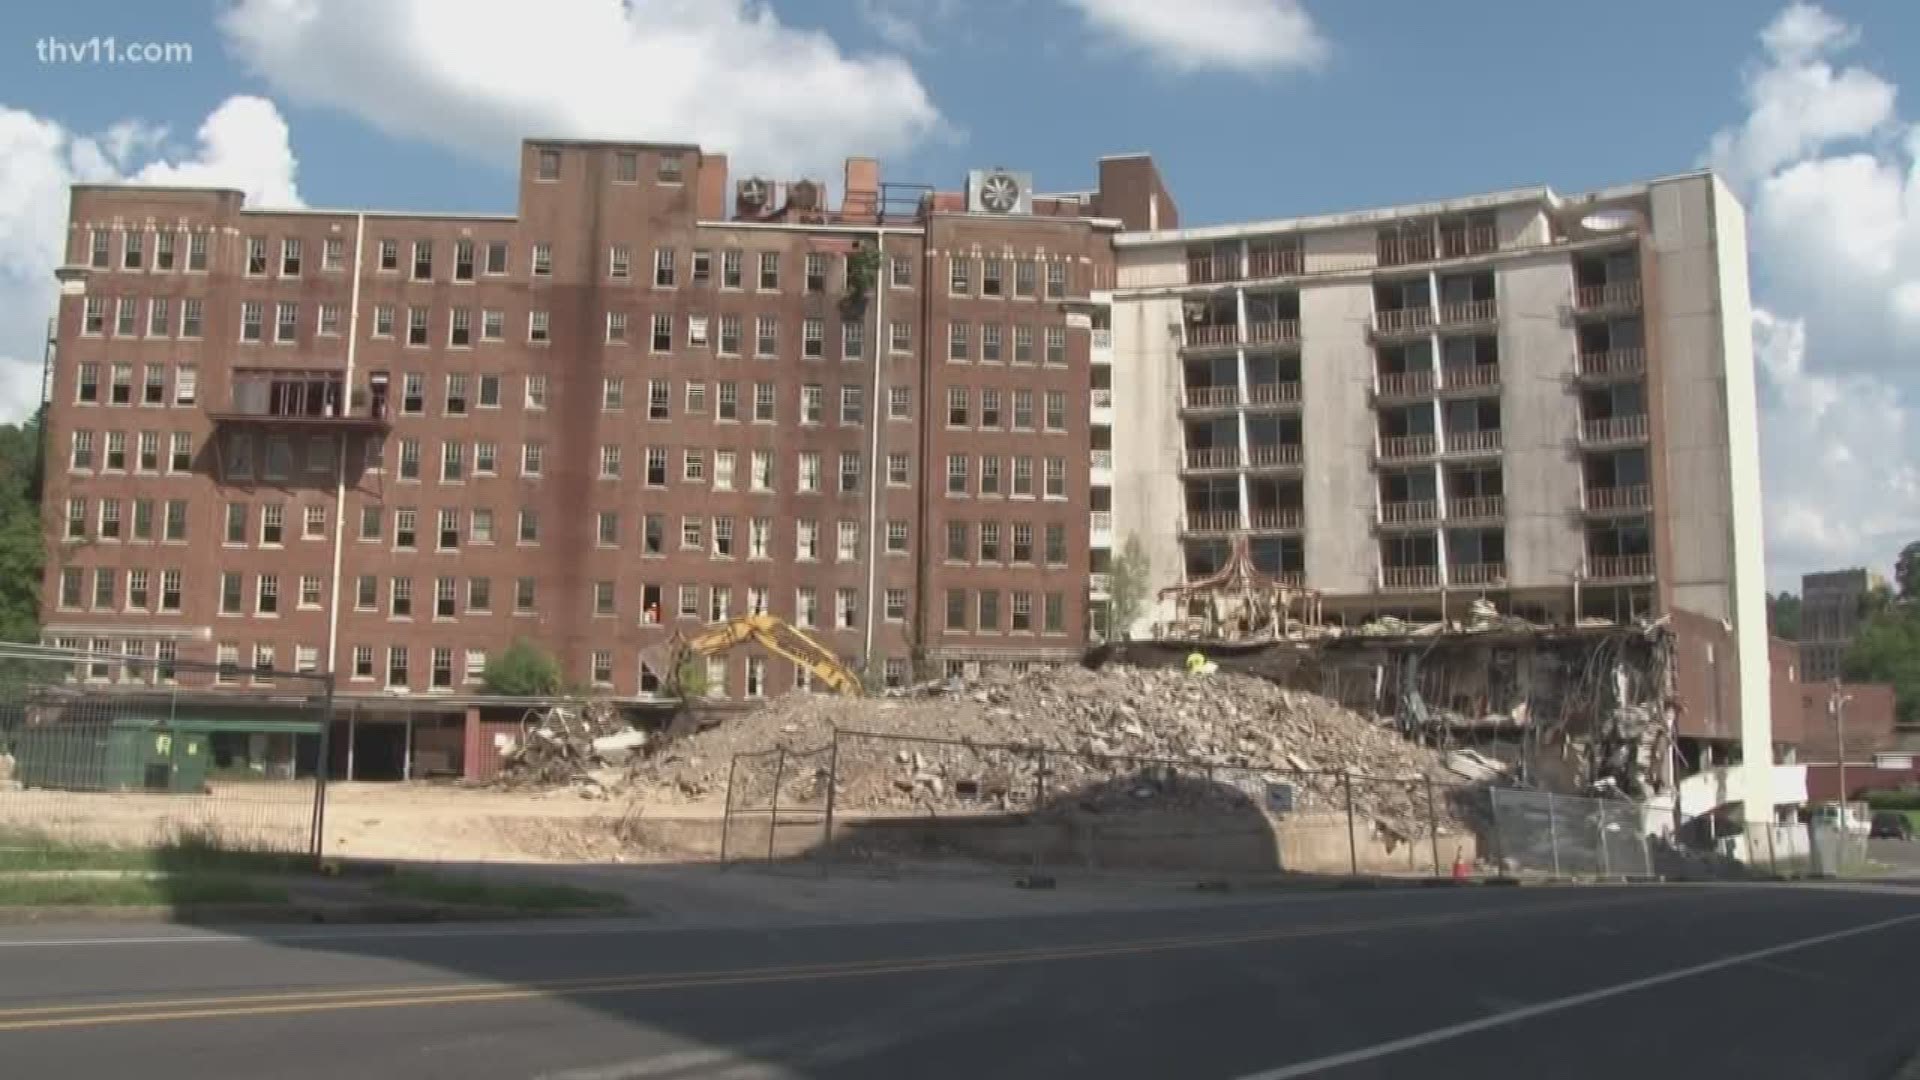 4-and-a-half years after the Majestic Hotel Fire, a major milestone for the site in downtown Hot Springs